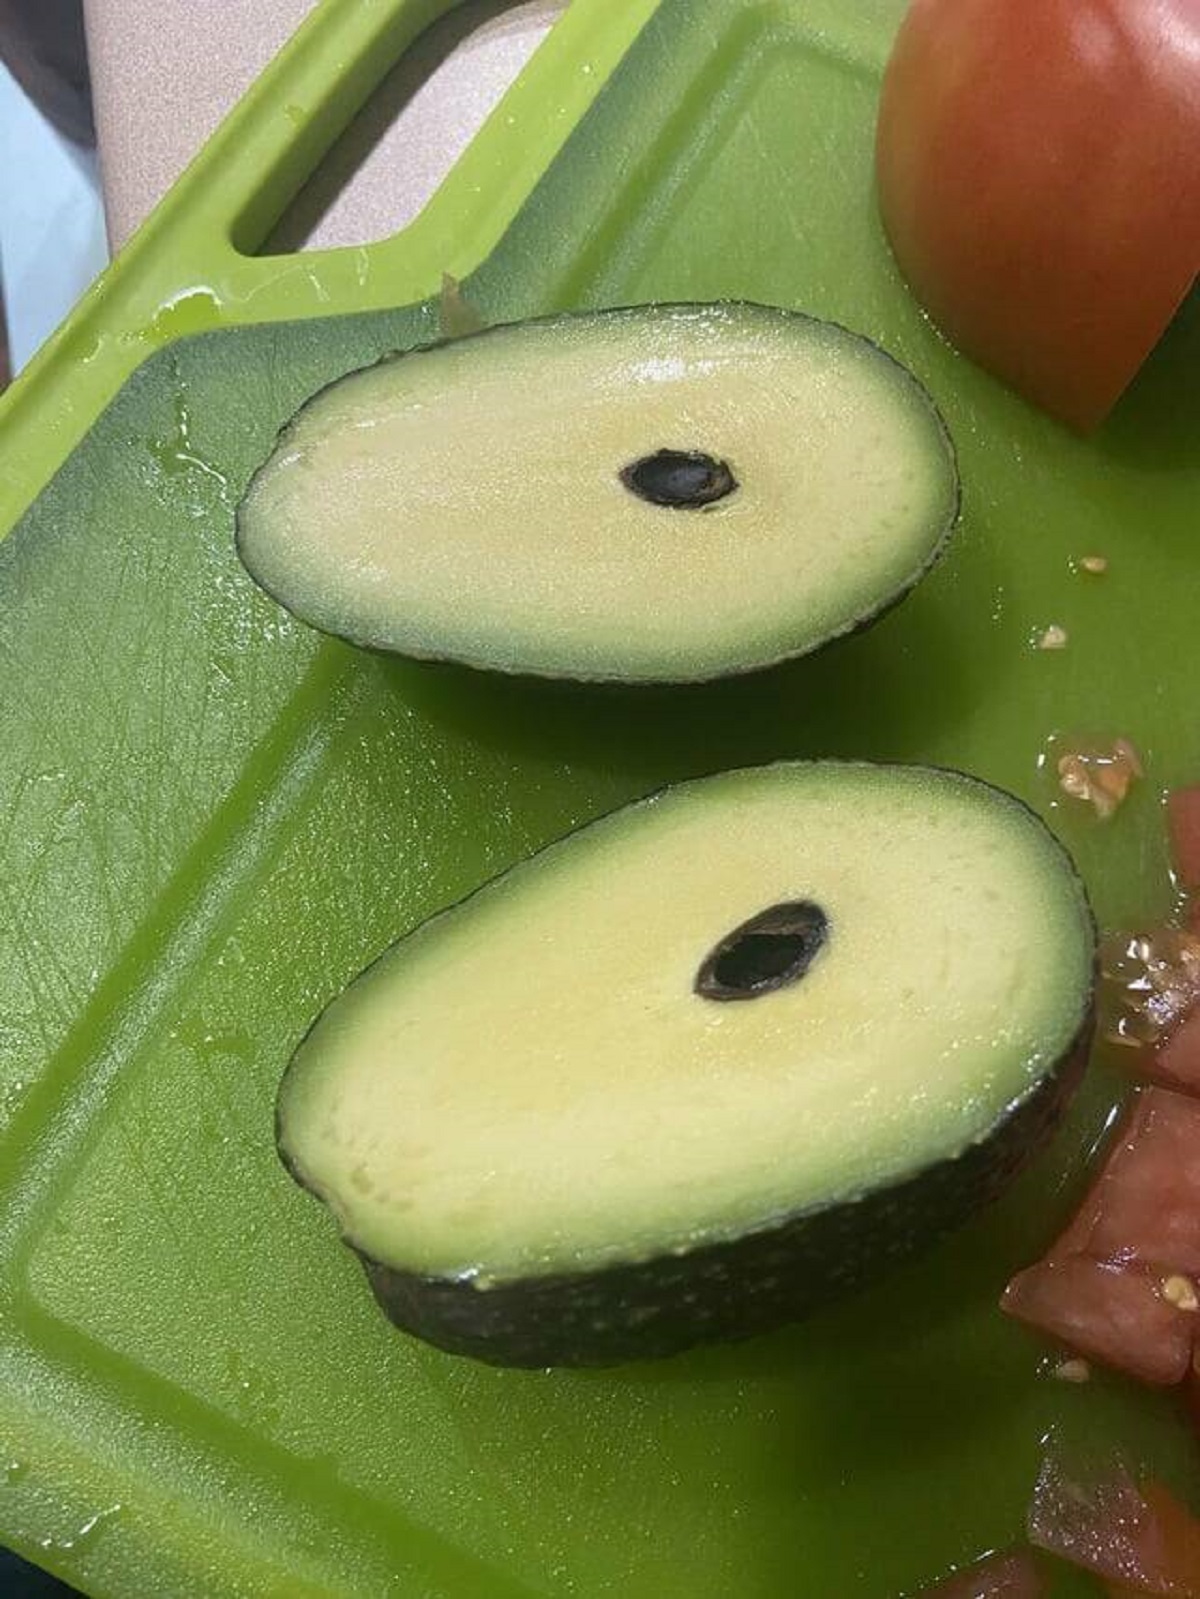 "This avocado my mom cut open has a very small pit"